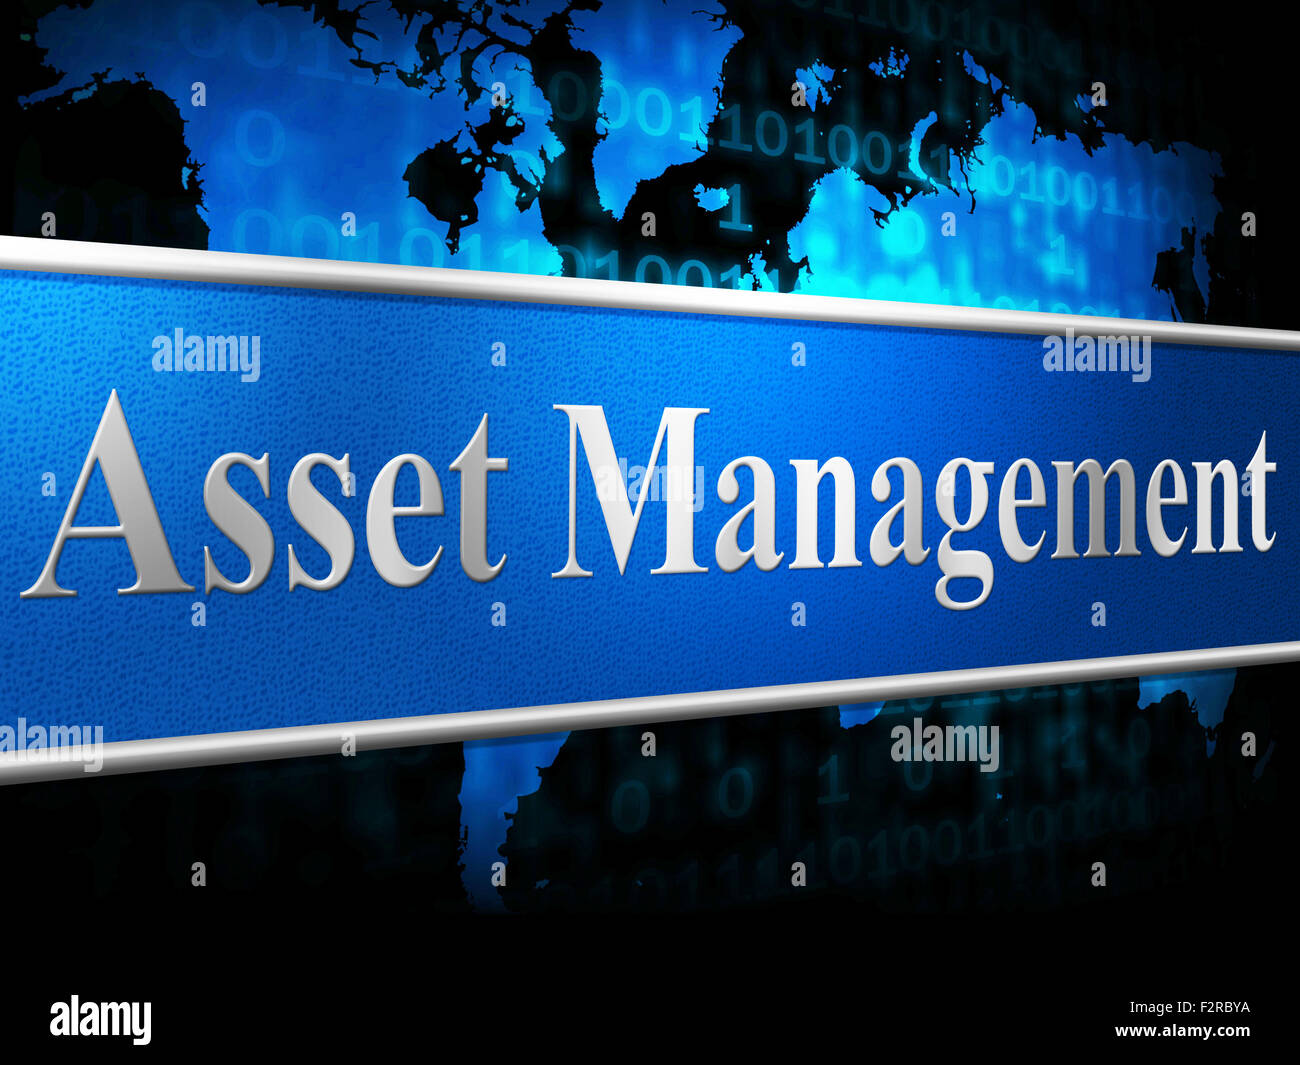 Asset Management Representing Business Assets And Directors Stock Photo